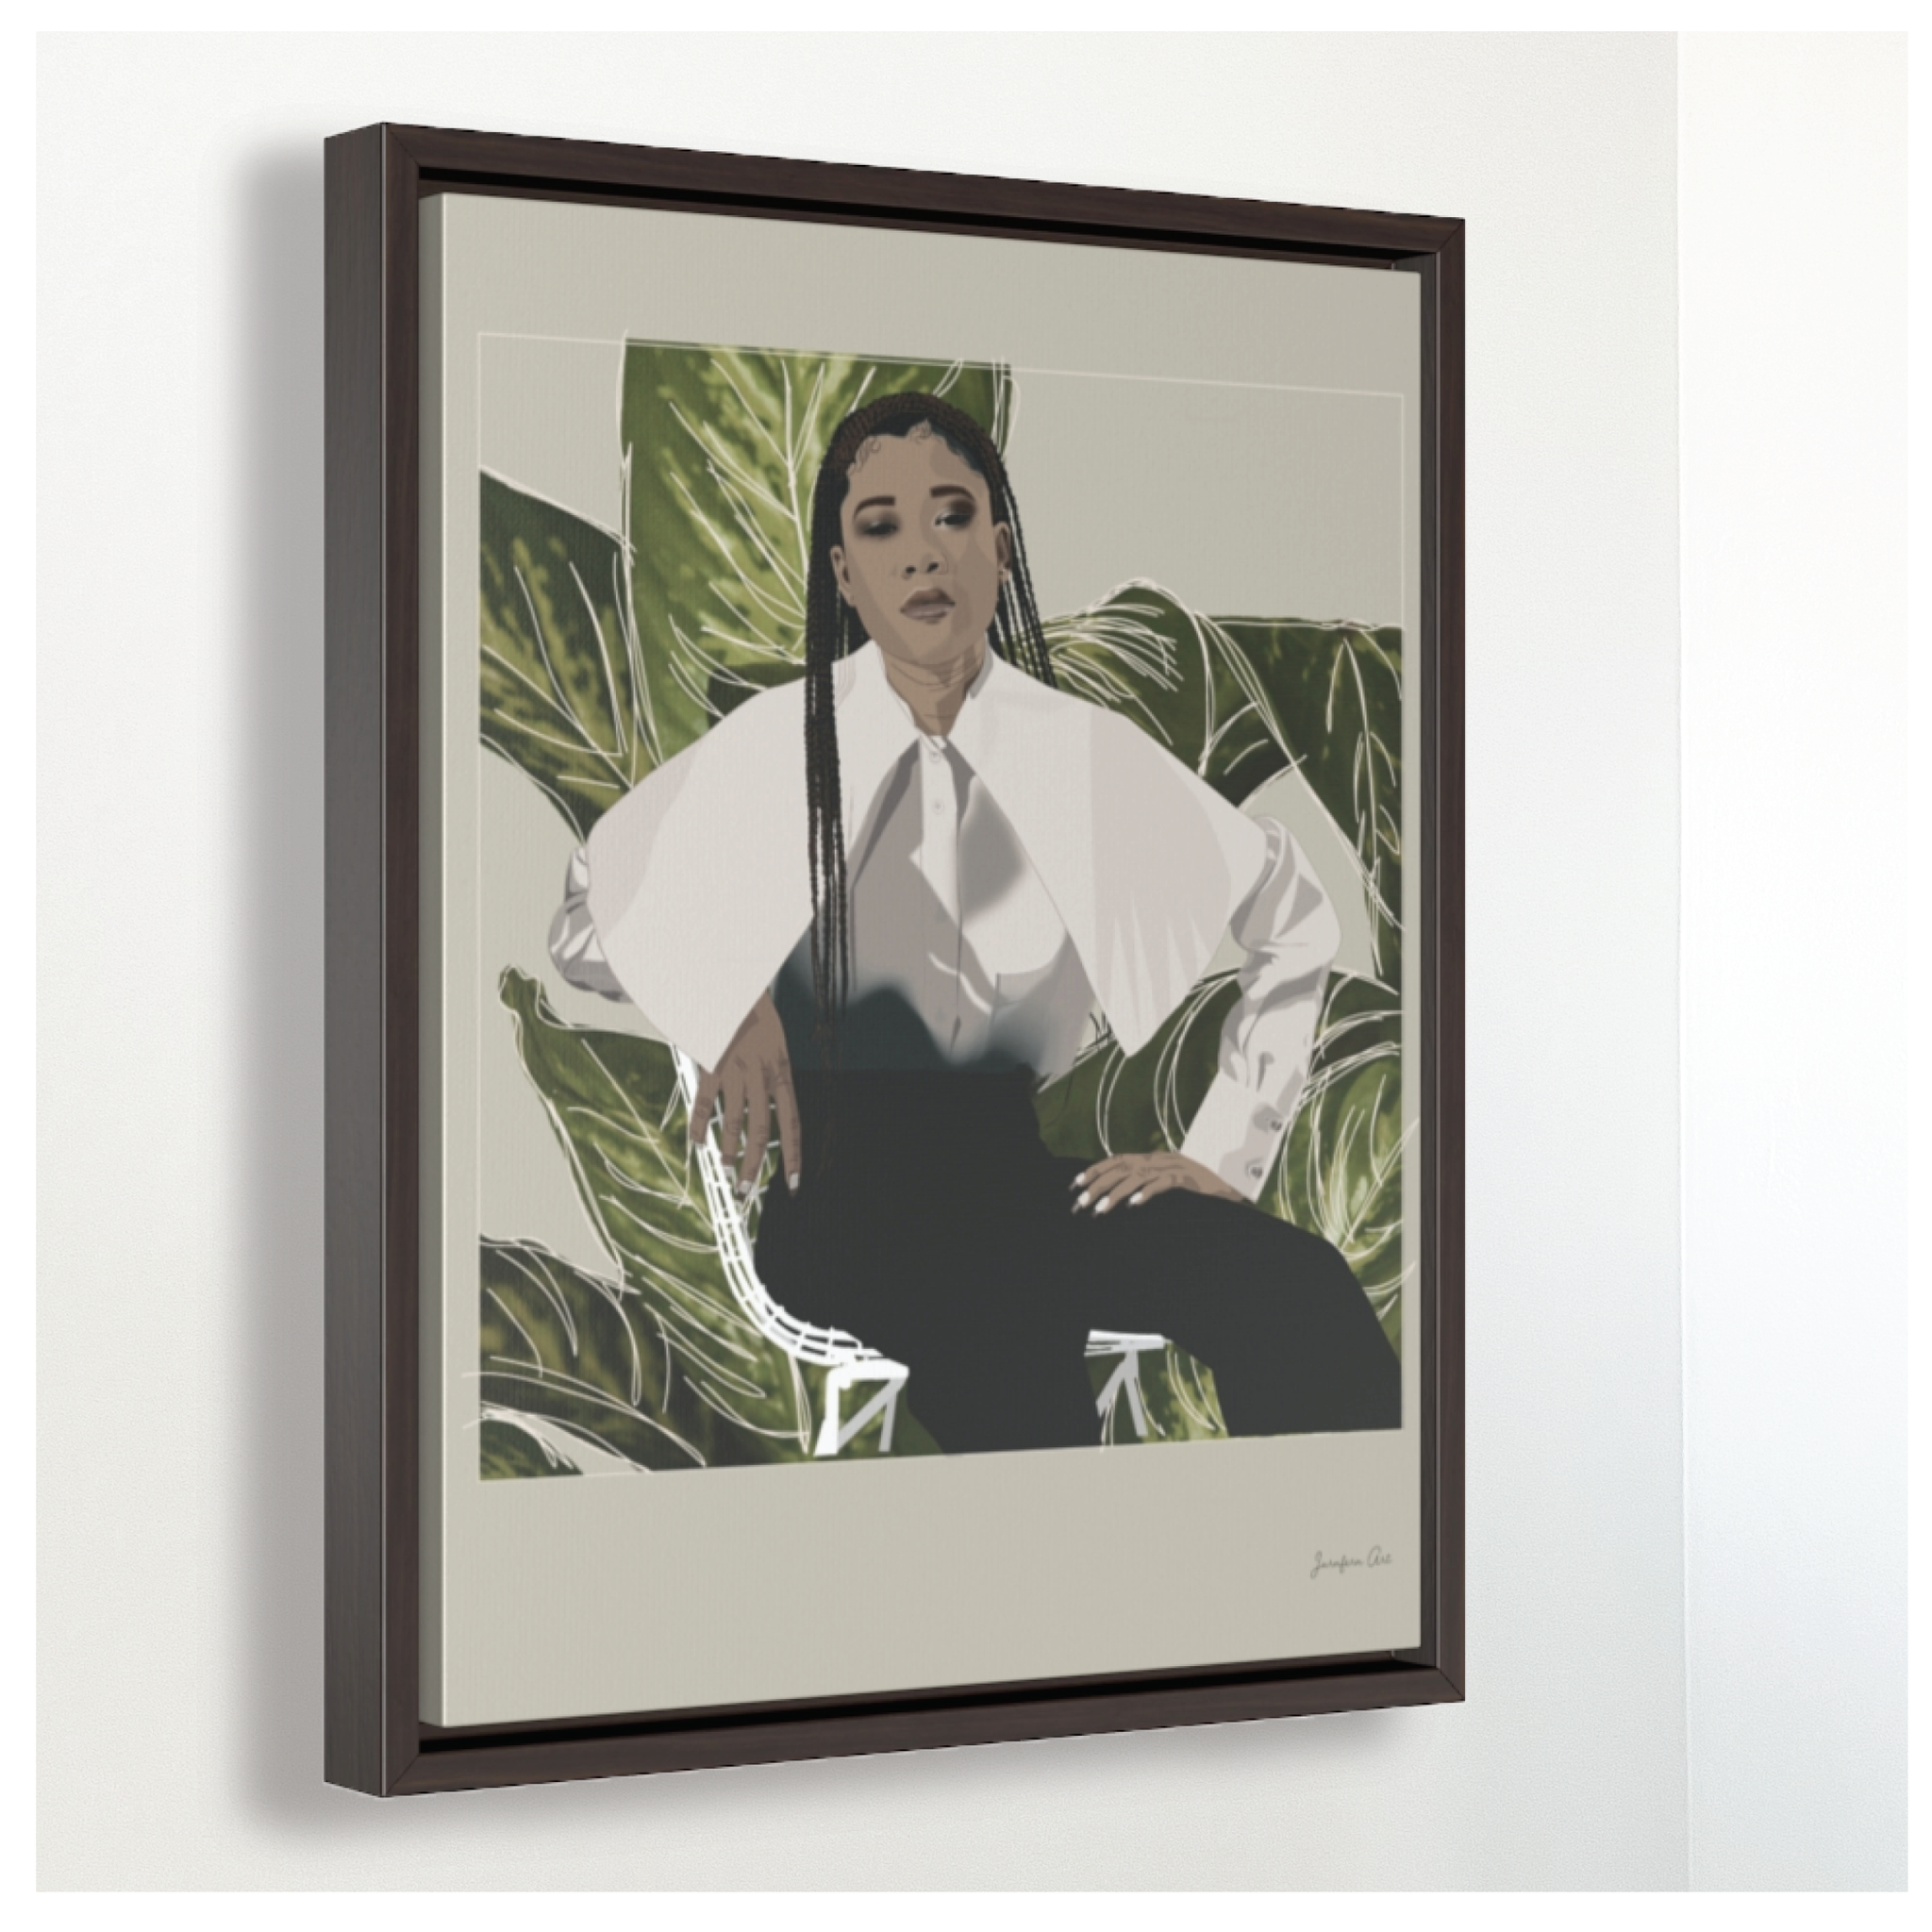 A large framed canvas illustration with a beige background and a digital illustration of actress Storm Reid posing in a chair and wearing a white blouse and black trousers, with a cut-out photo of leaves behind her